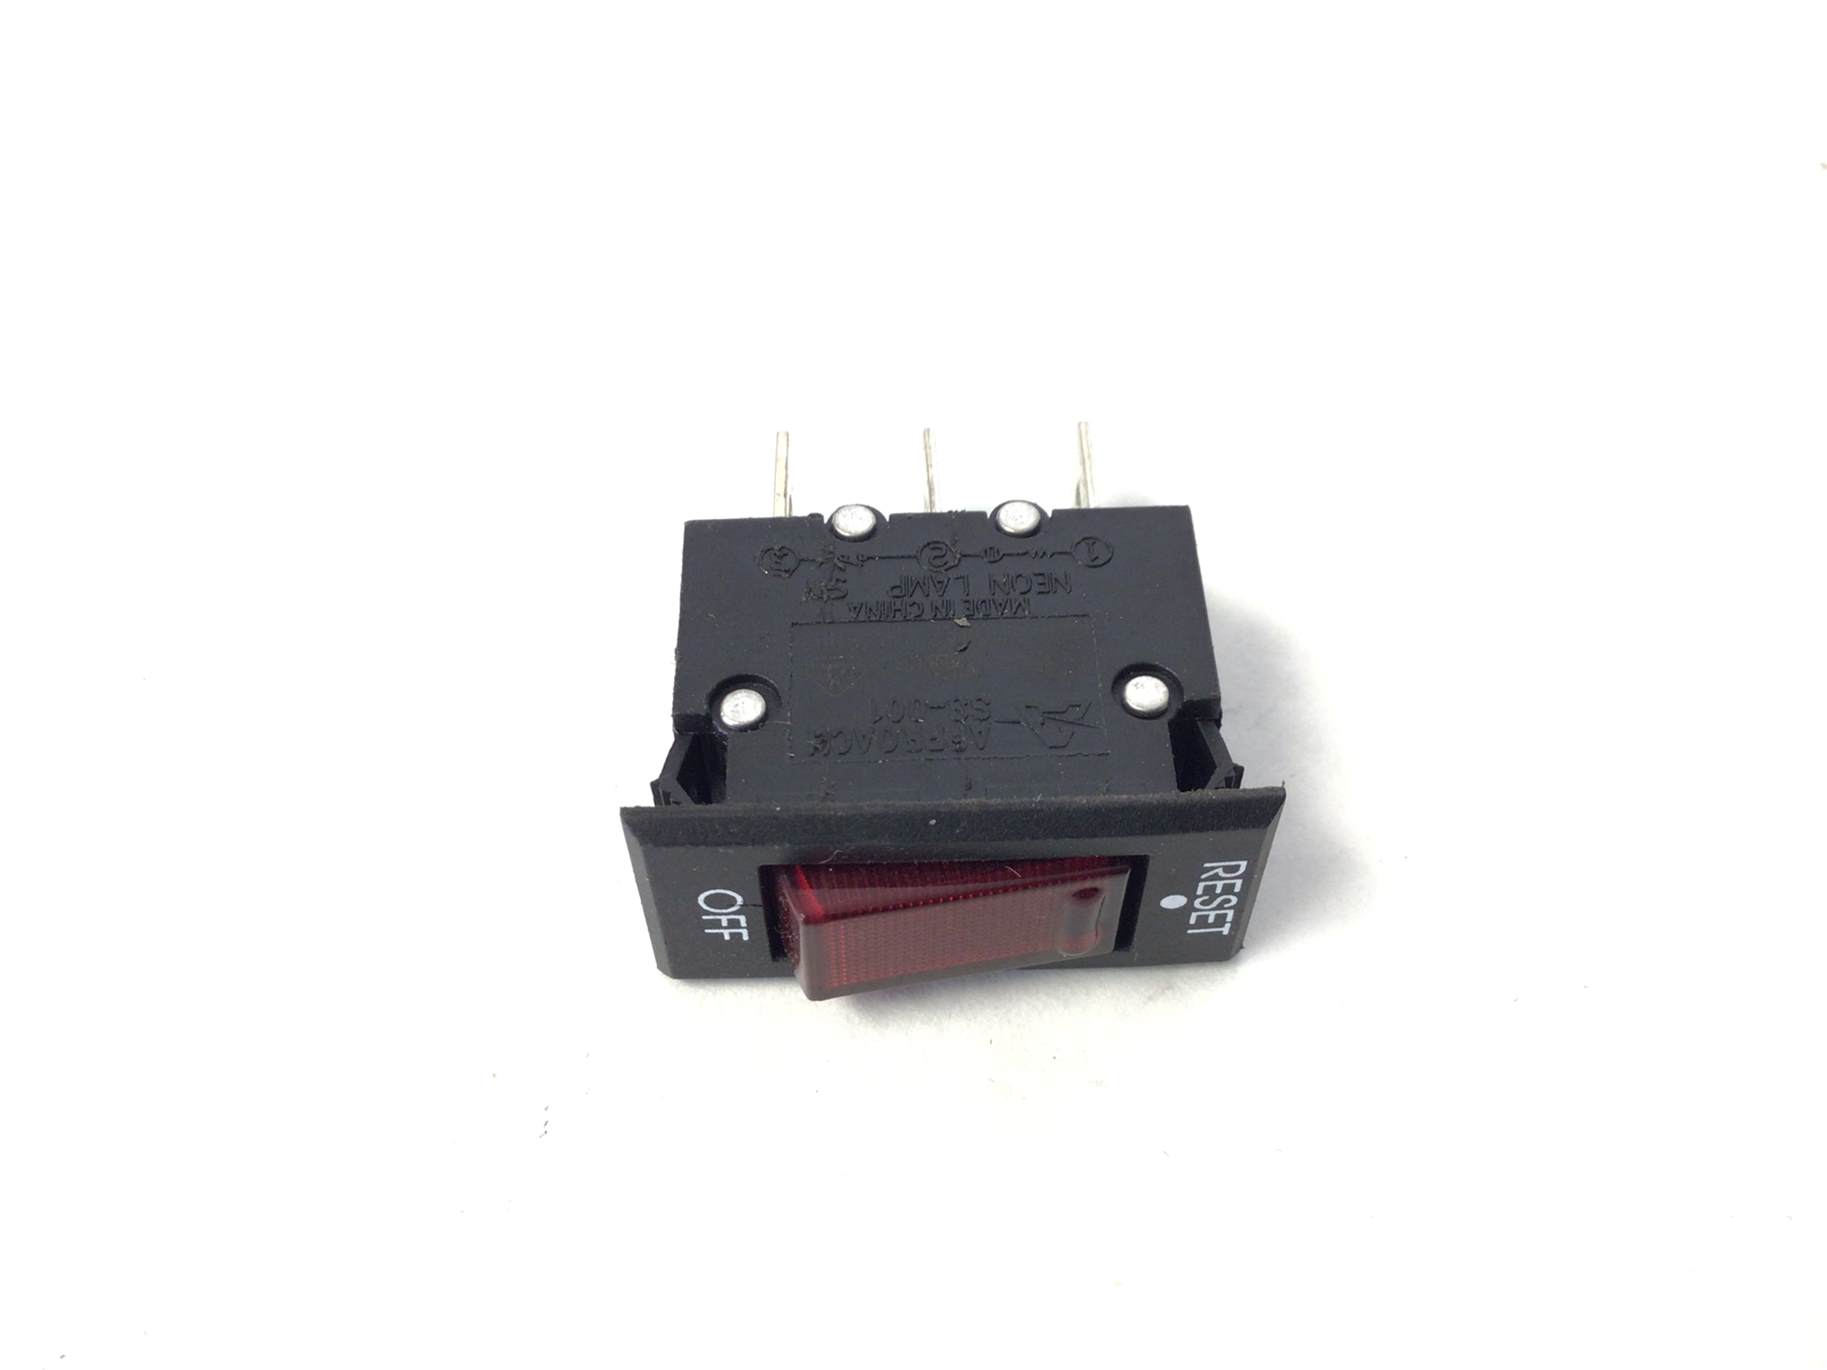 Power ON OFF RESET Switch (Used)